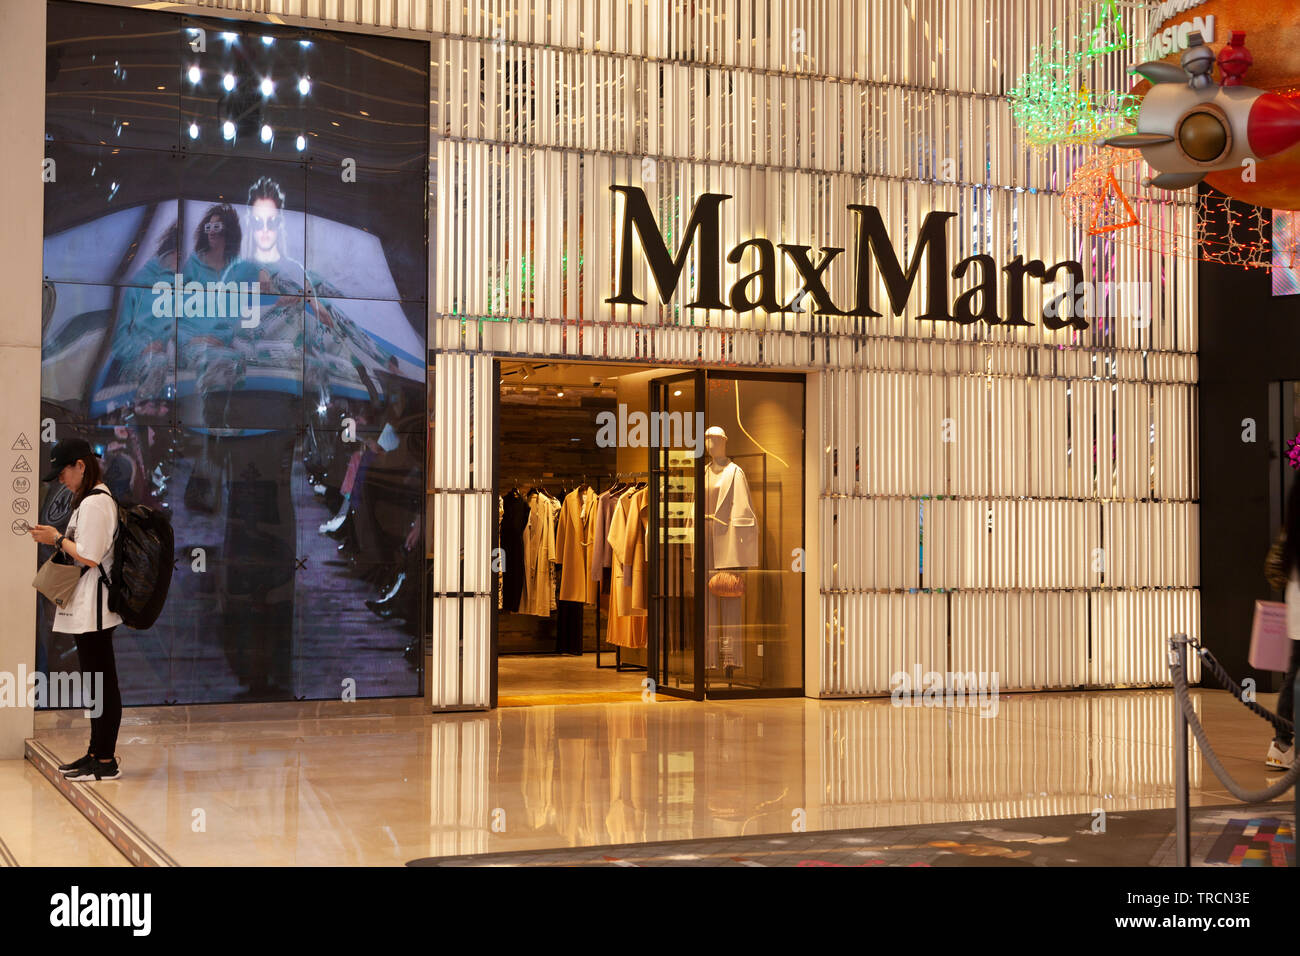 Max Mara Store High Resolution Stock Photography and Images - Alamy